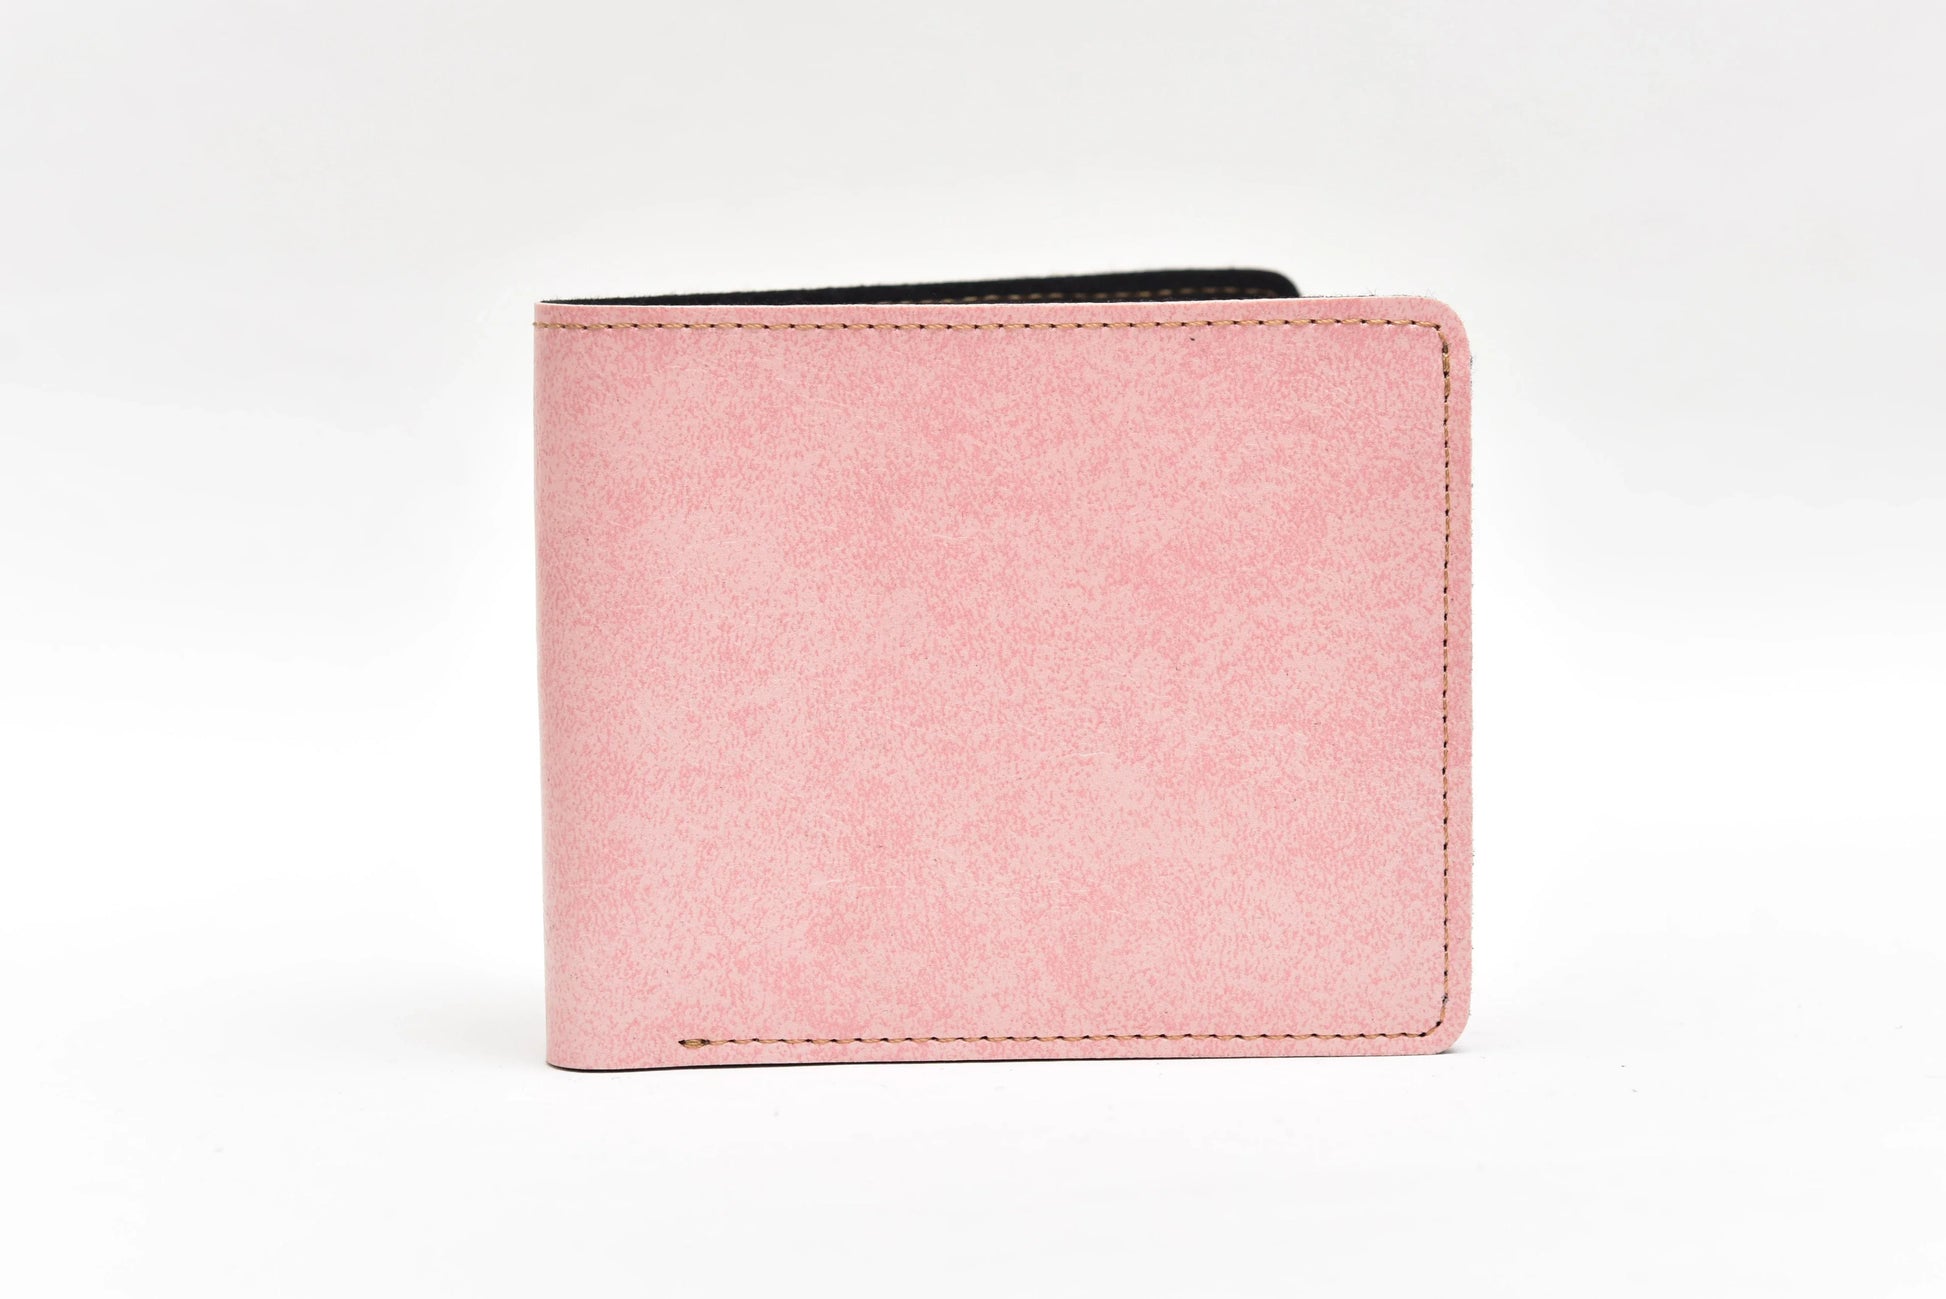 Whether you're shopping for yourself or searching for the perfect gift, our customized leather wallet is the perfect choice. Made from high-quality materials and available in a variety of colors, this wallet is both stylish and practical.